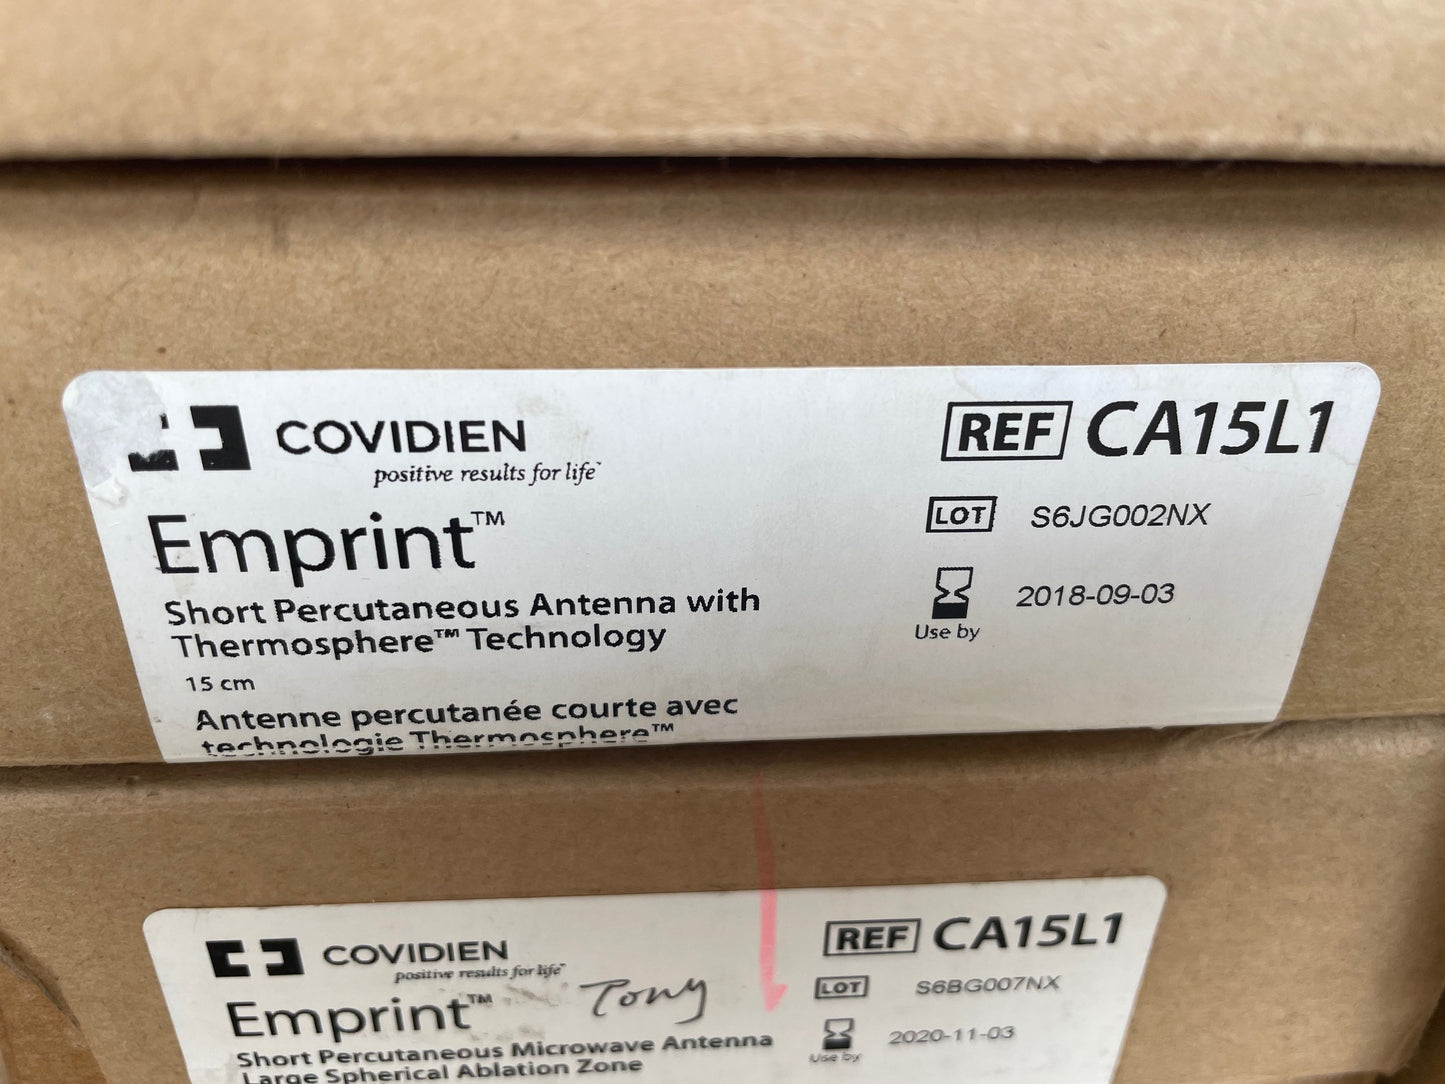 Lot of 213 Expired Covidien Medtronic Emprint